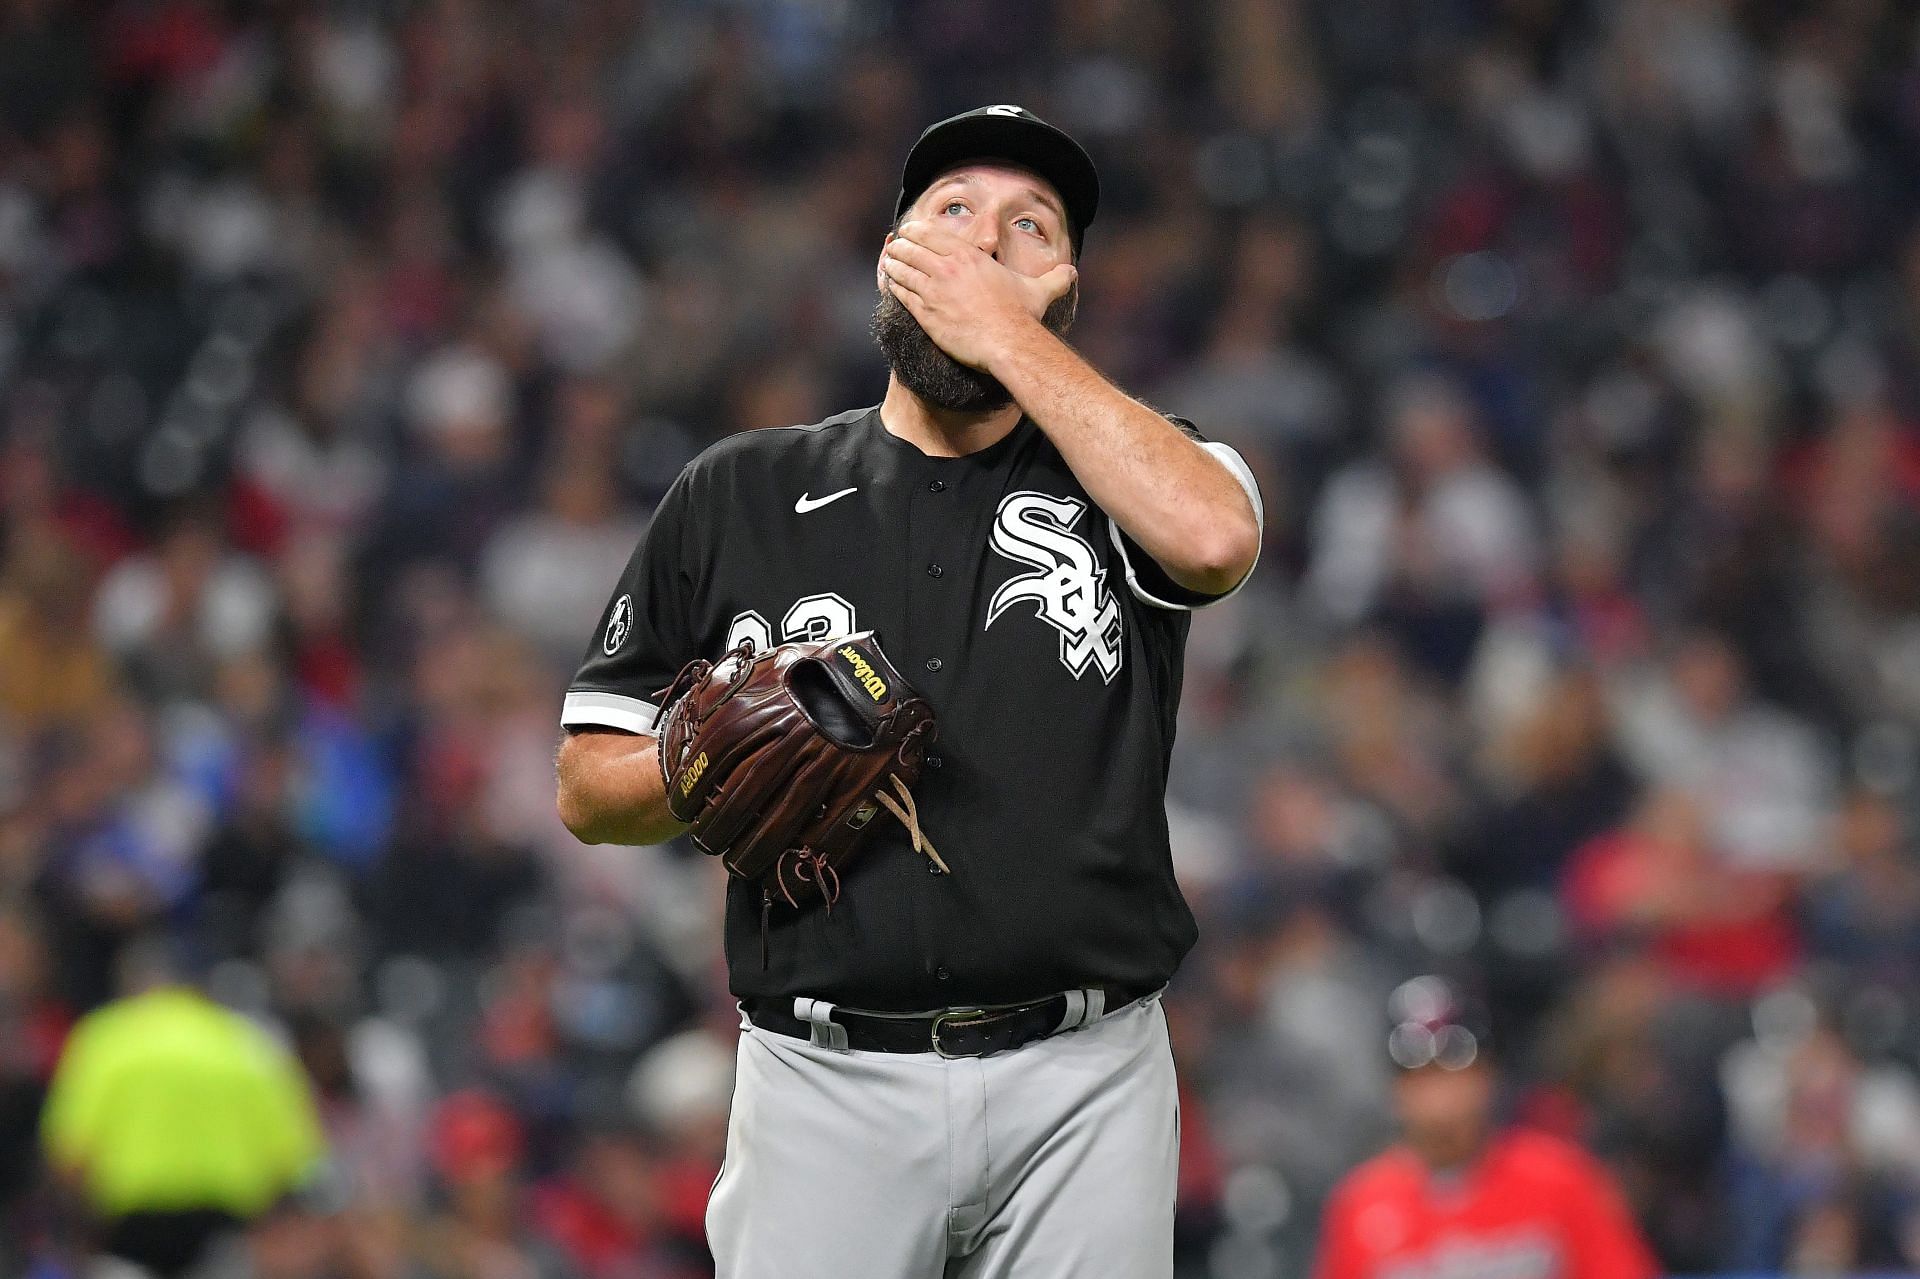 Chicago White Sox starting pitcher Lance Lynn recorded a 2.69 ERA in 2021.